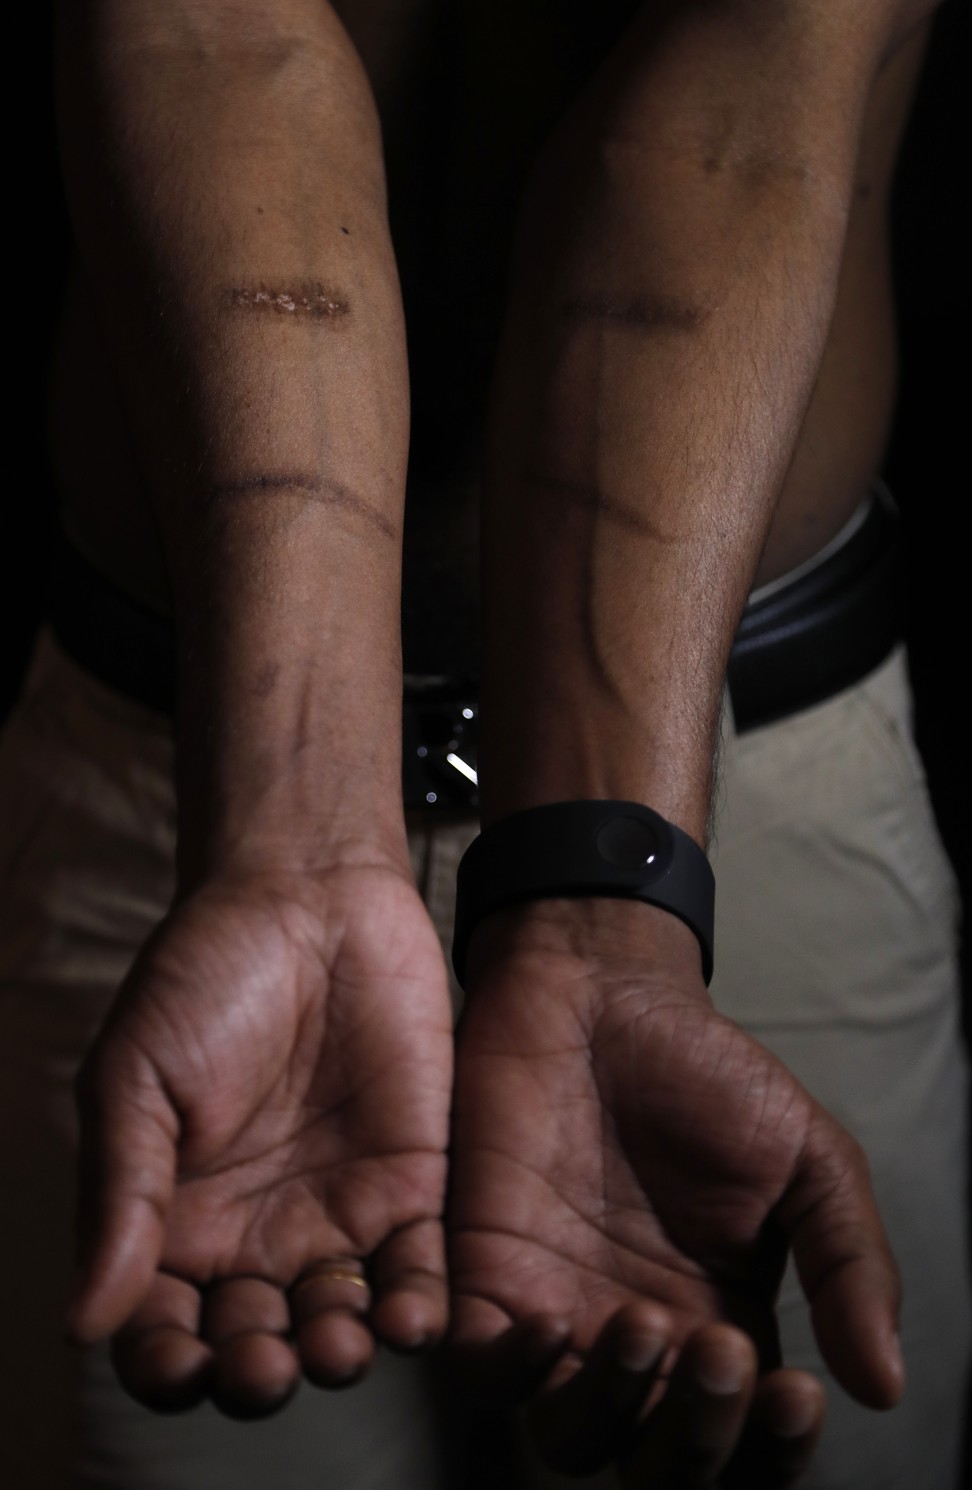 One of the dozens of men, who claimed to be tortured in Sri Lankan government detention, shows his scars. Photo: AP